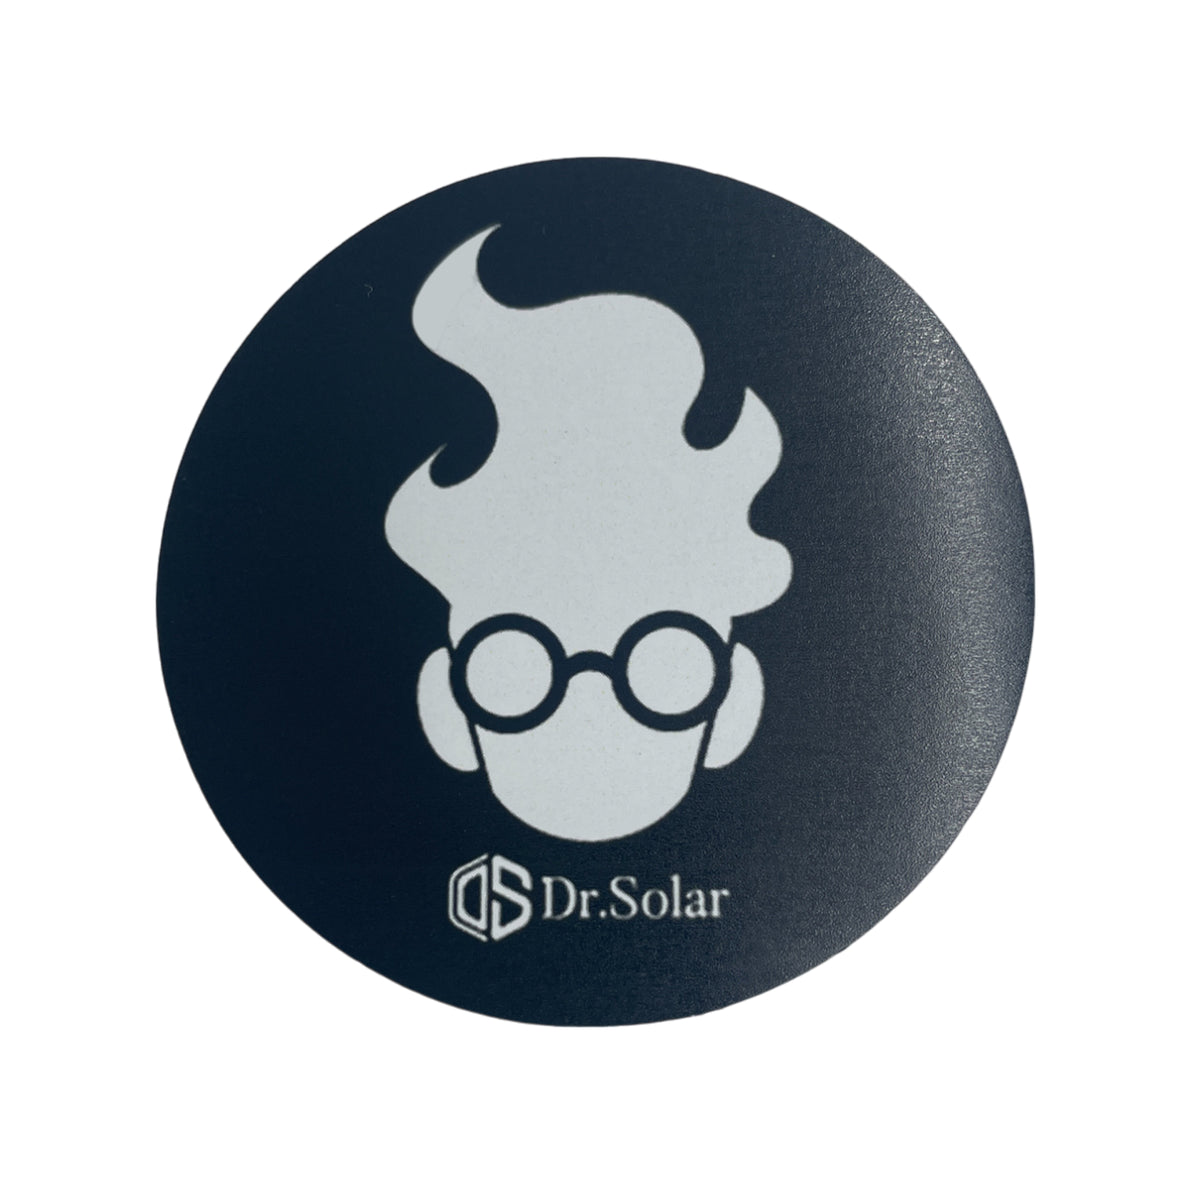 Dr.Solar Character Black Circle Sticker for Laptop, Journal, Notesbook, Phone, Computer, Luggage